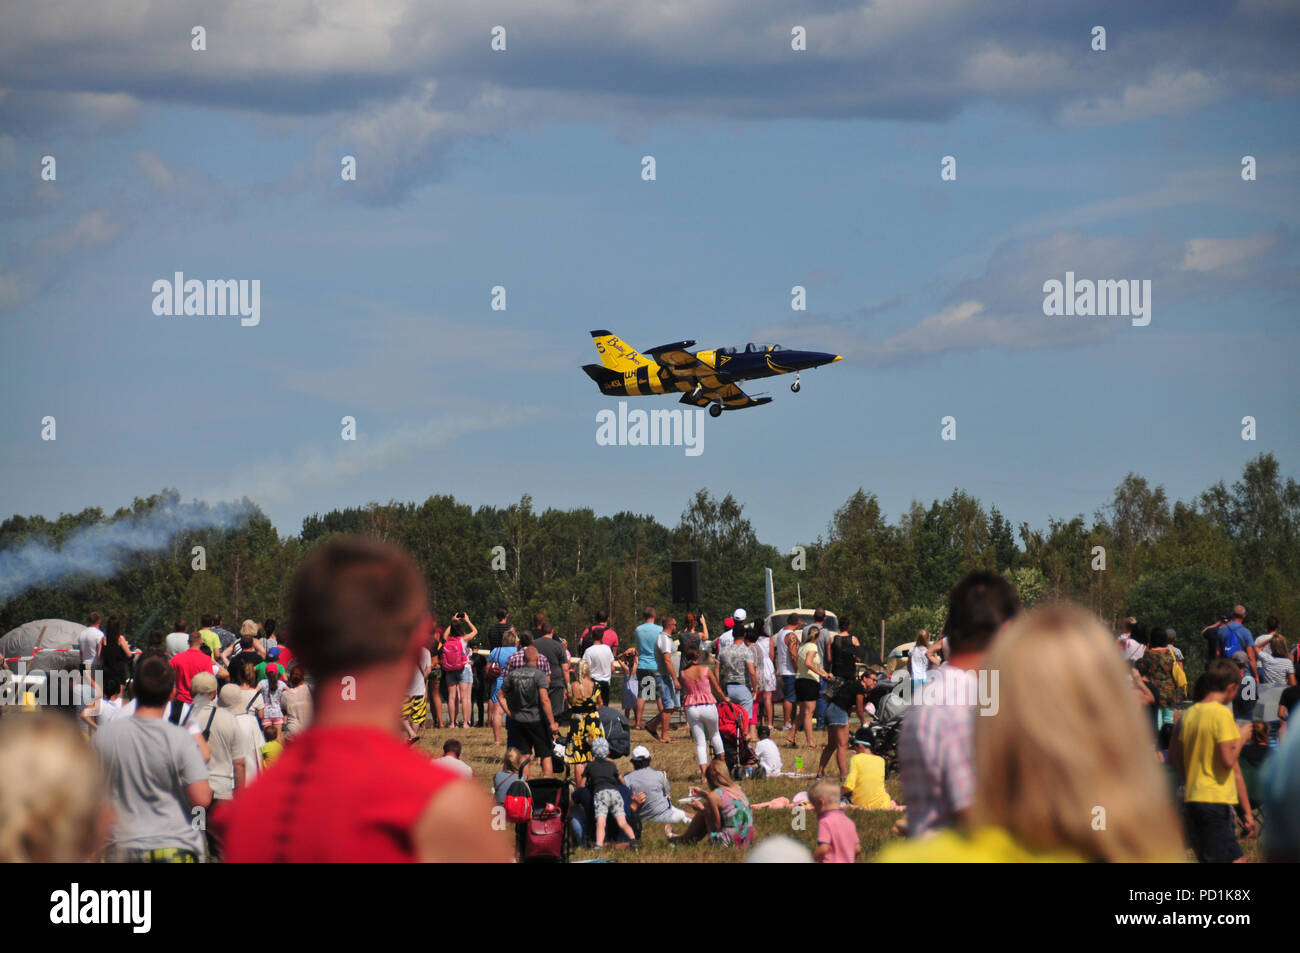 Tukums, Latvia. 5th Aug, 2018. People watch the Wings Over Baltics Air Show at Jurmala Airport, Tukums, Latvia, Aug. 5, 2018. An international air show Wings Over Baltics was held here from Aug. 4 to Aug. 5, attracting thousands of visitors. Credit: Janis/Xinhua/Alamy Live News Stock Photo